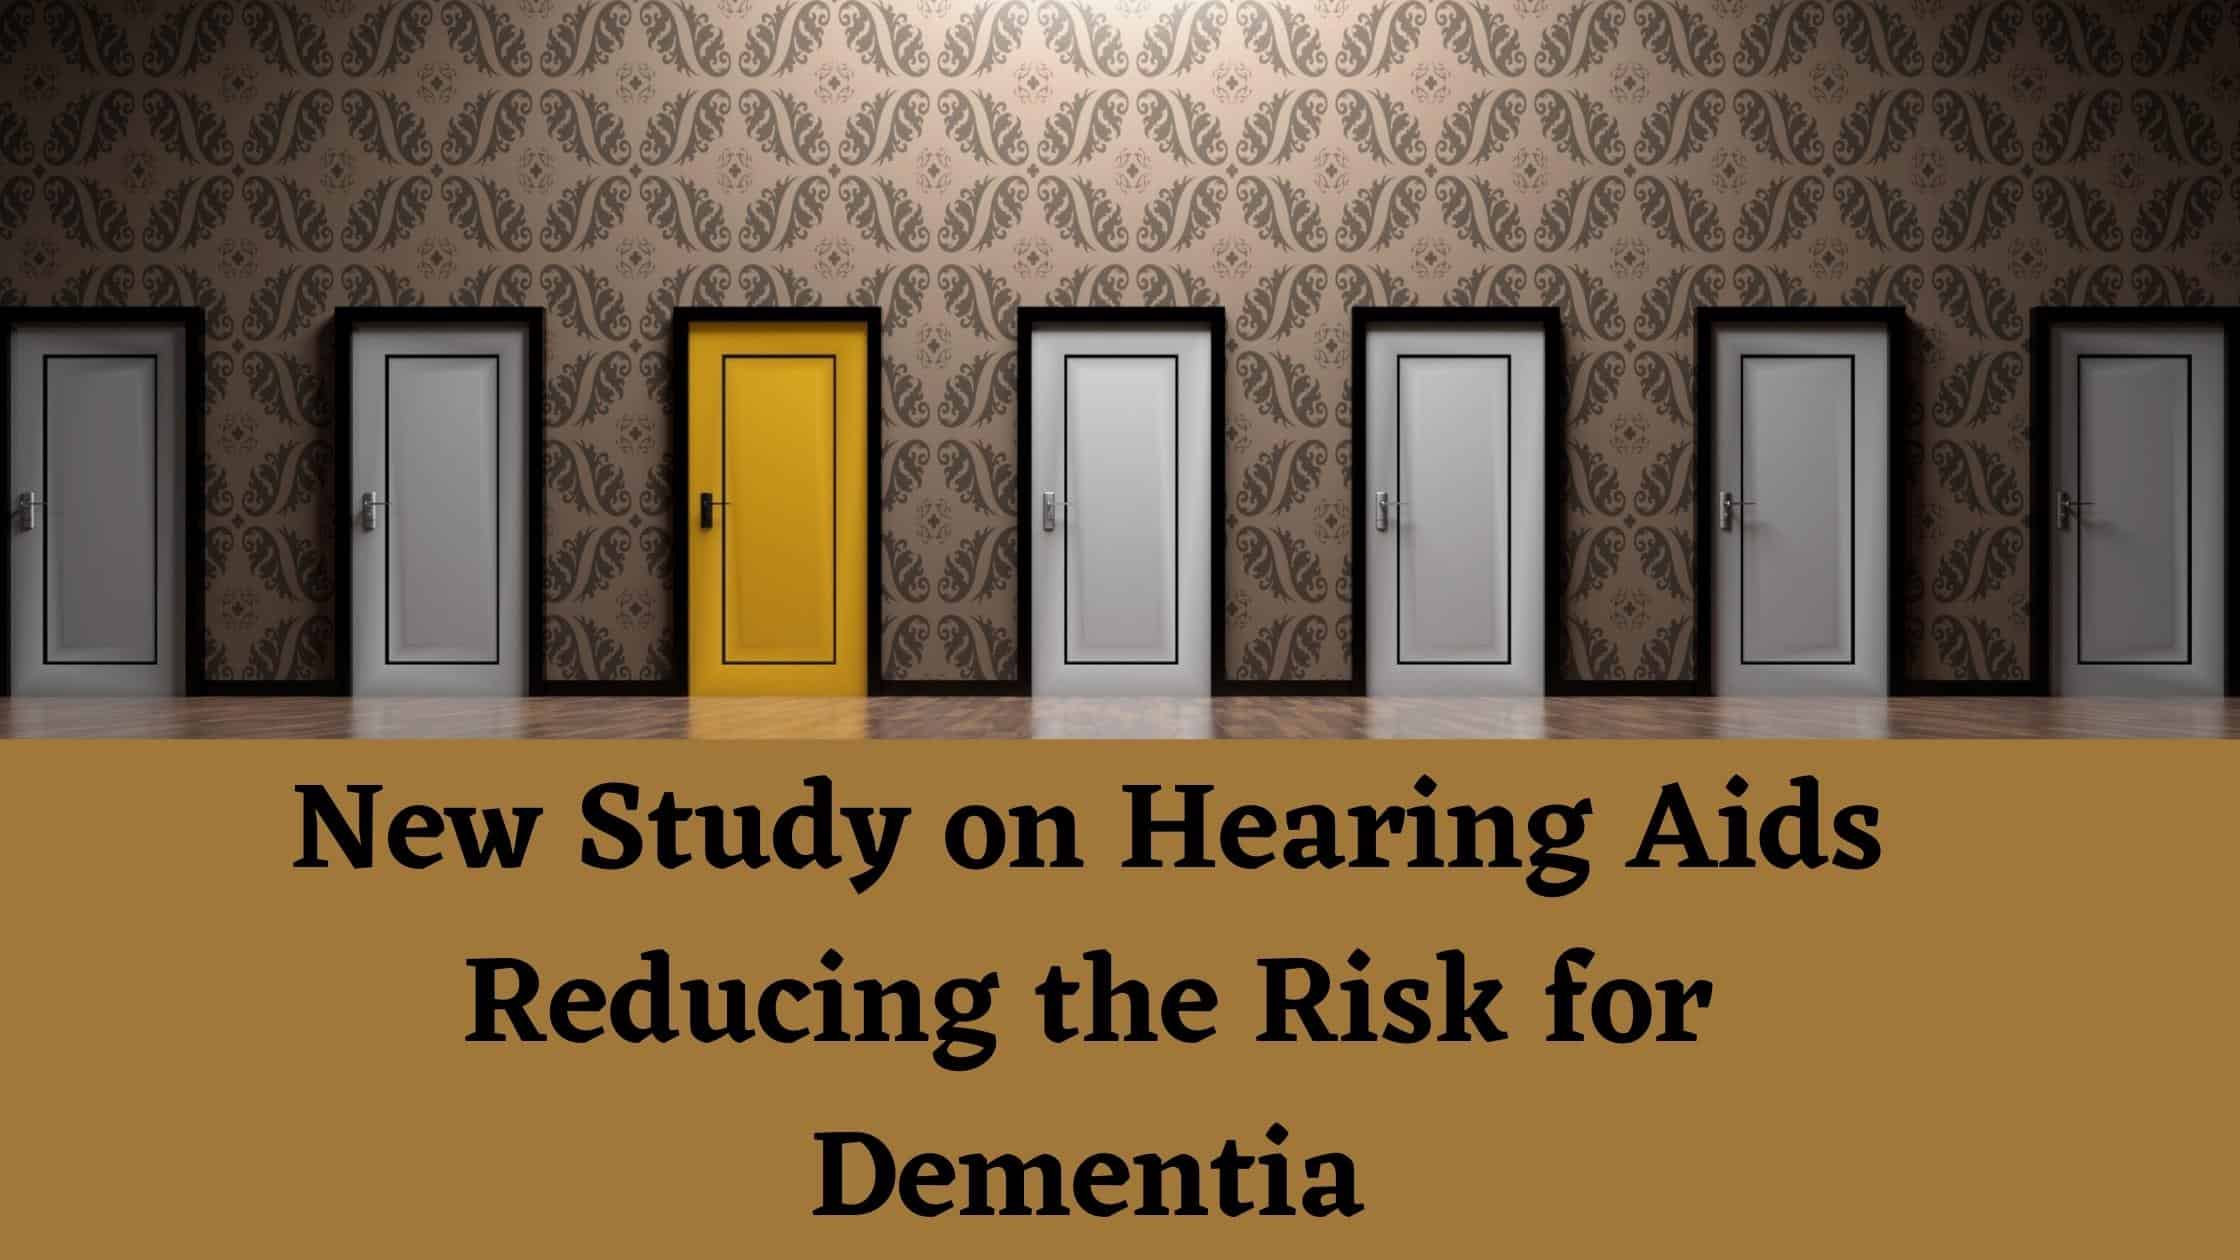 Featured image for “New Study on Hearing Aids Reducing the Risk for Dementia”